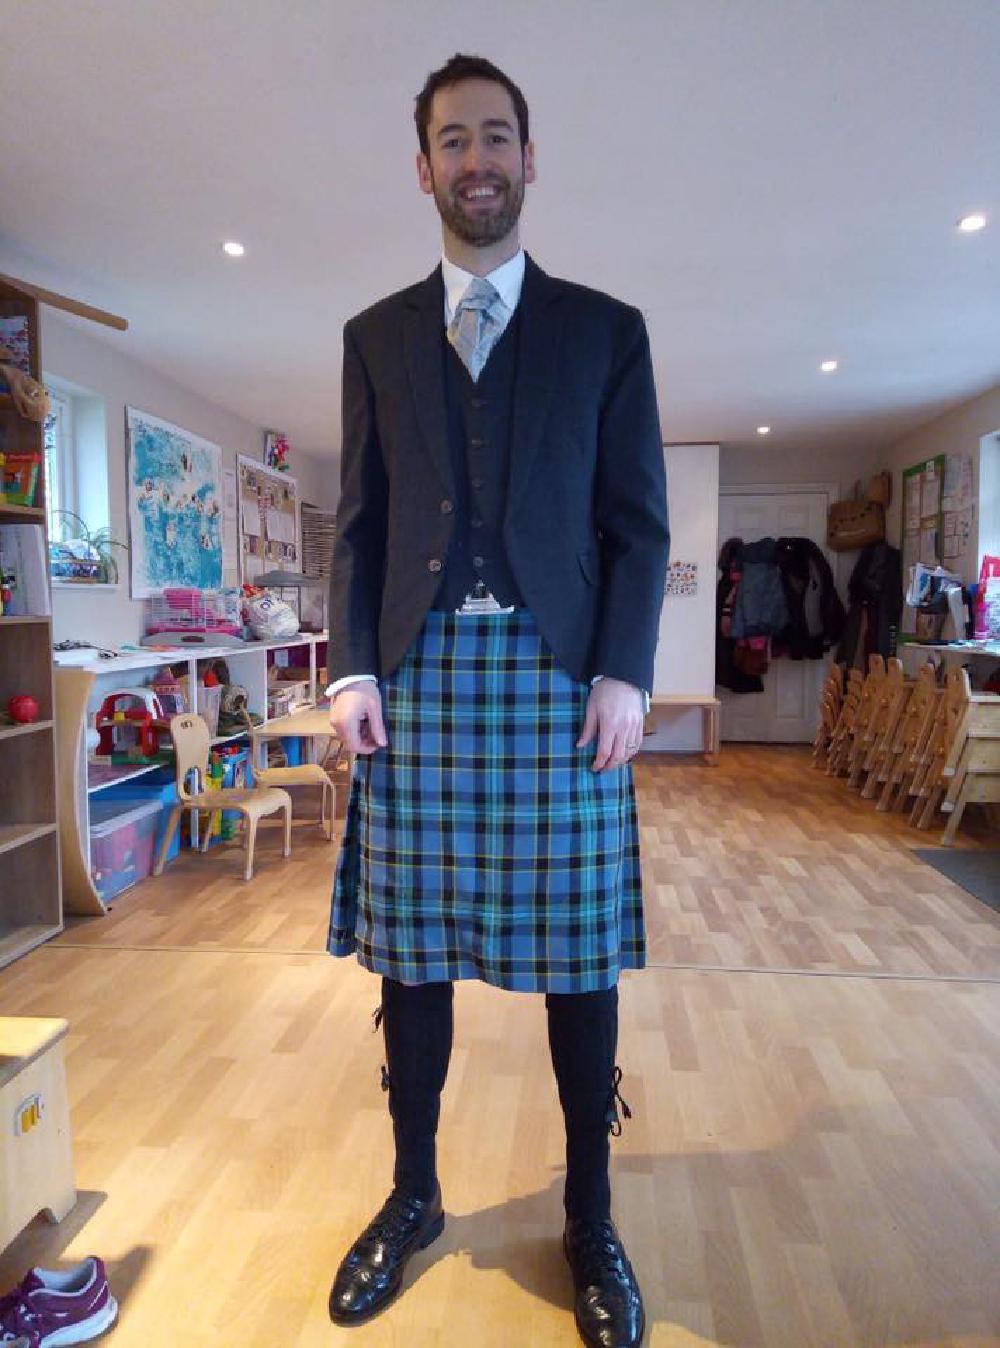 We love welcoming our families in to chat with us. We learnt about Burns Night from one of our Scottish Dads.